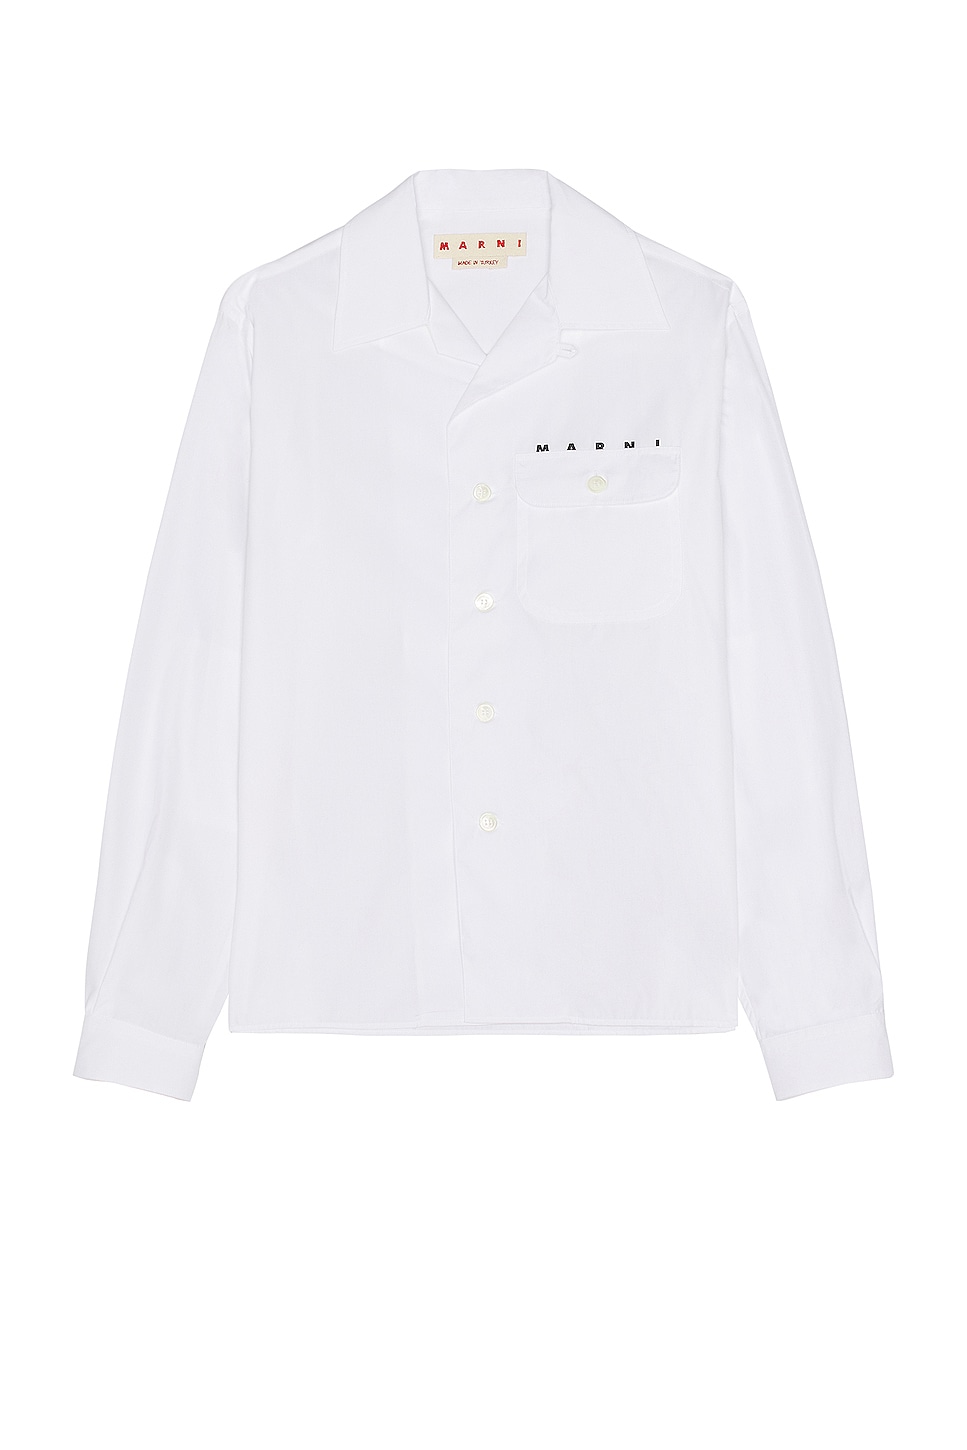 Image 1 of Marni Shirt in Lily White